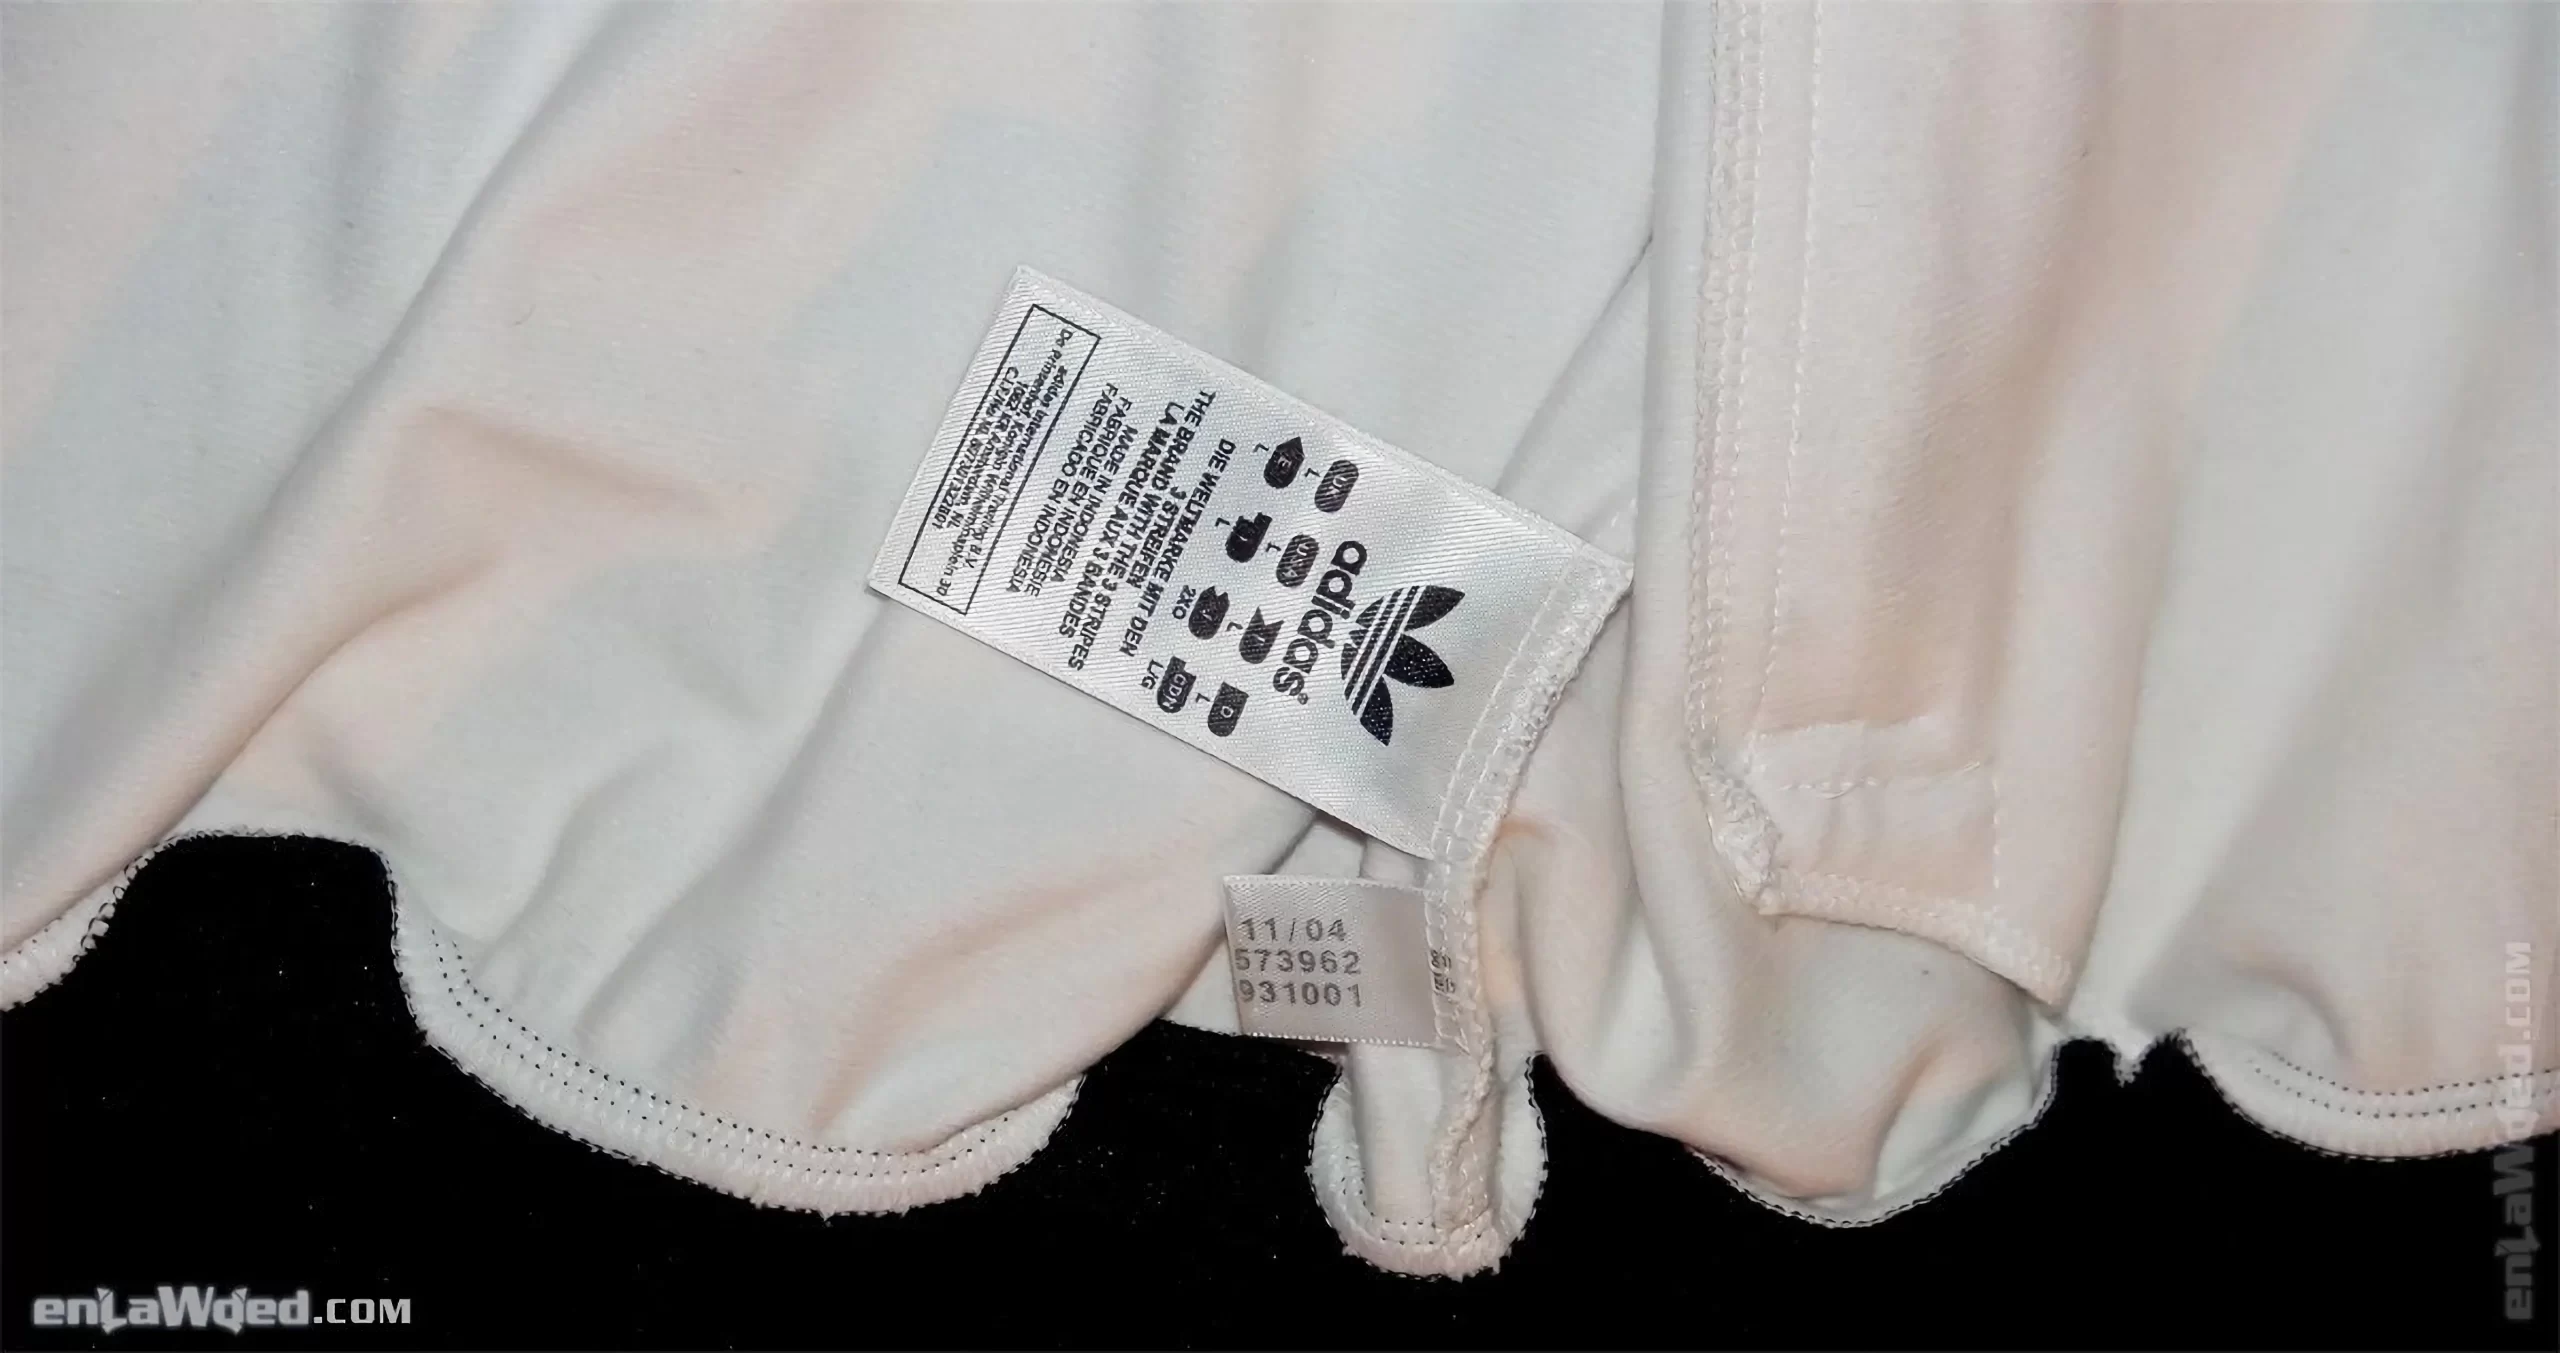 Adidas tag of the Honduras jacket, with the month and year of fabrication: 11/2004